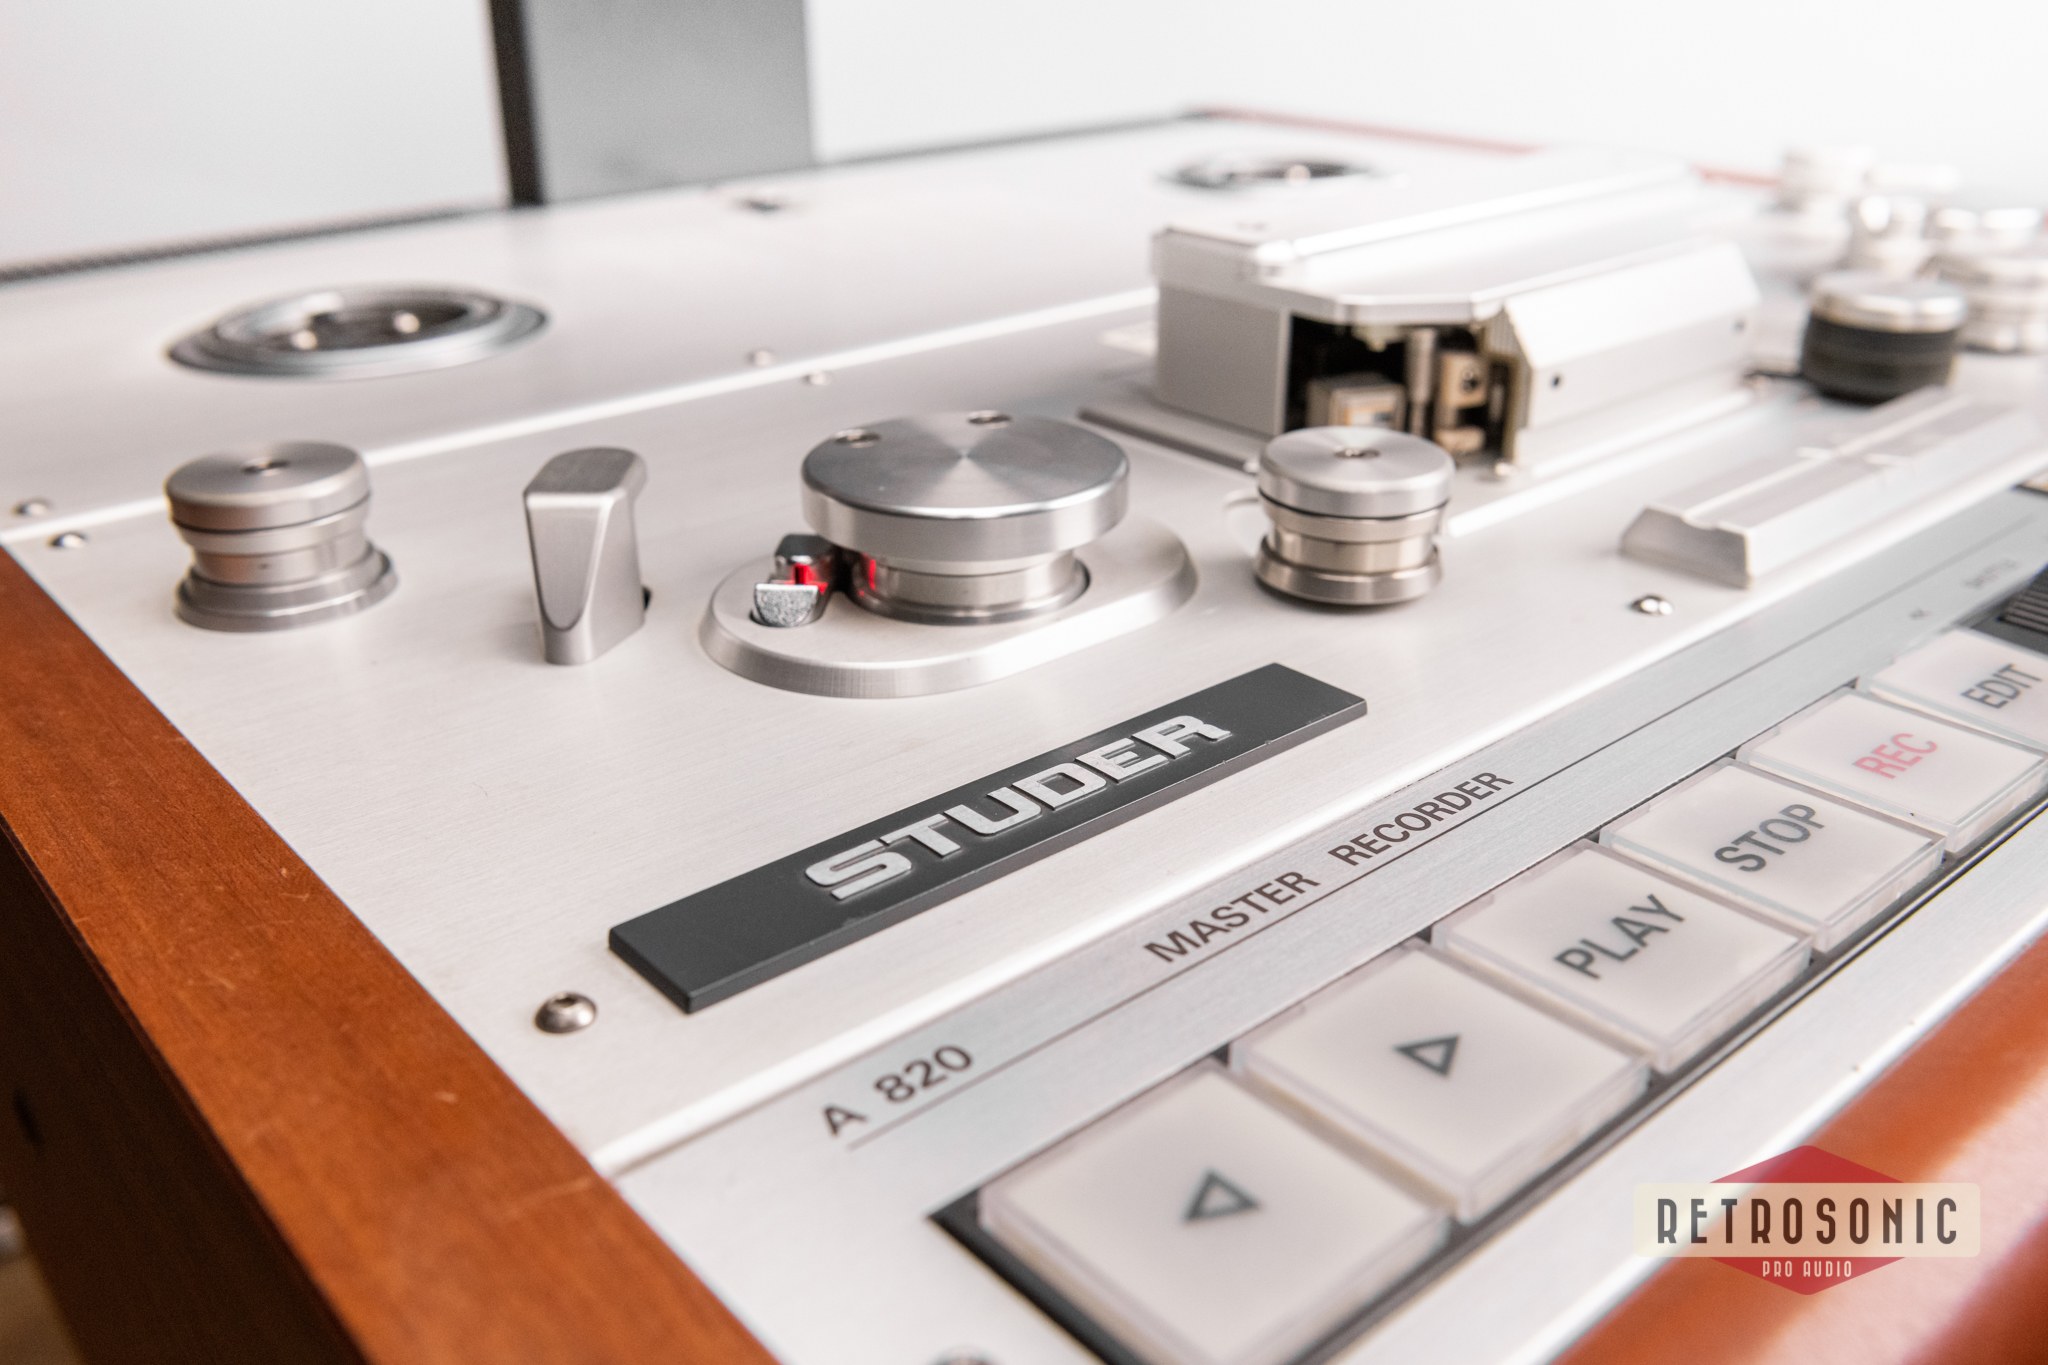 https://www.retrosonic.shop/retrosonic-future/images/products/studer-a820-1-4-inch-master-tape-recorder-12.jpg